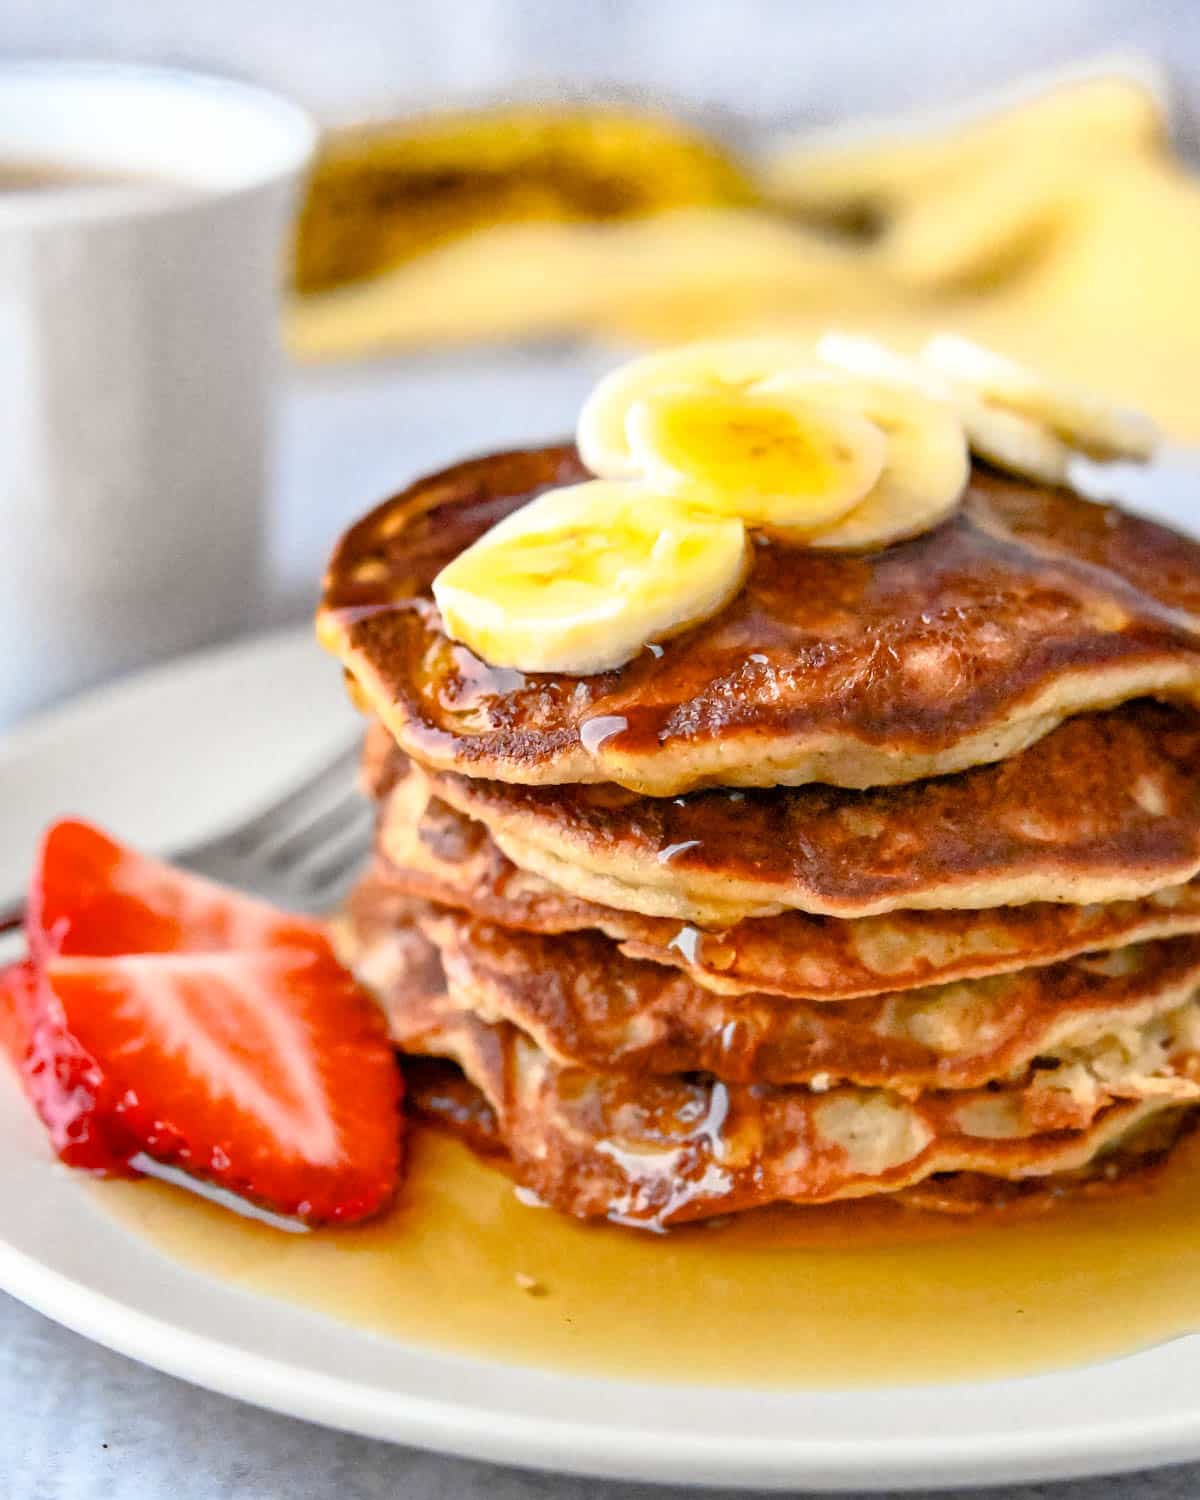 Gluten-free, dairy-free pancakes with maple syrup.